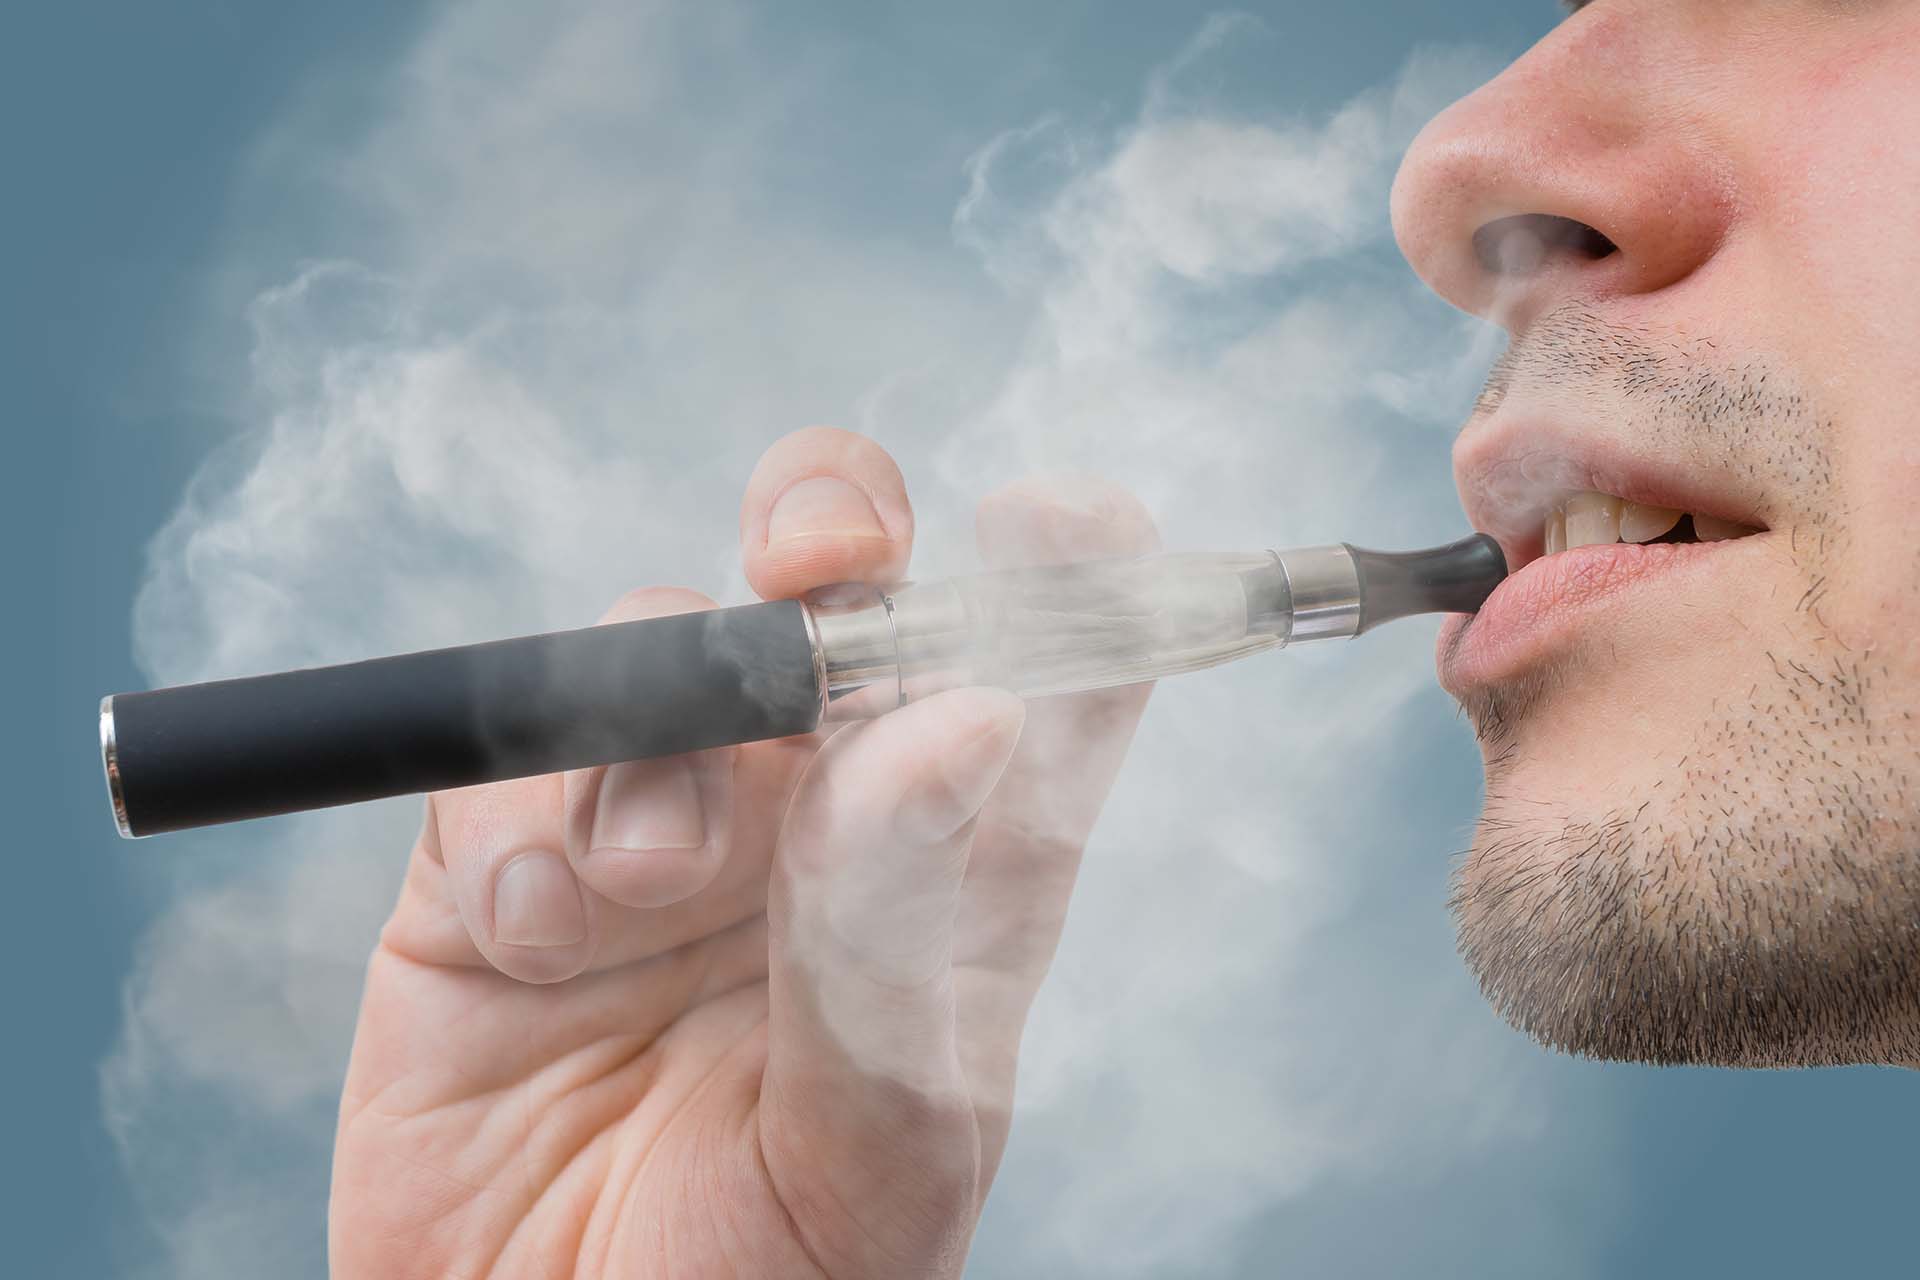 Is Vaping Bad for Your Teeth? Vaping & Oral Health (Image)